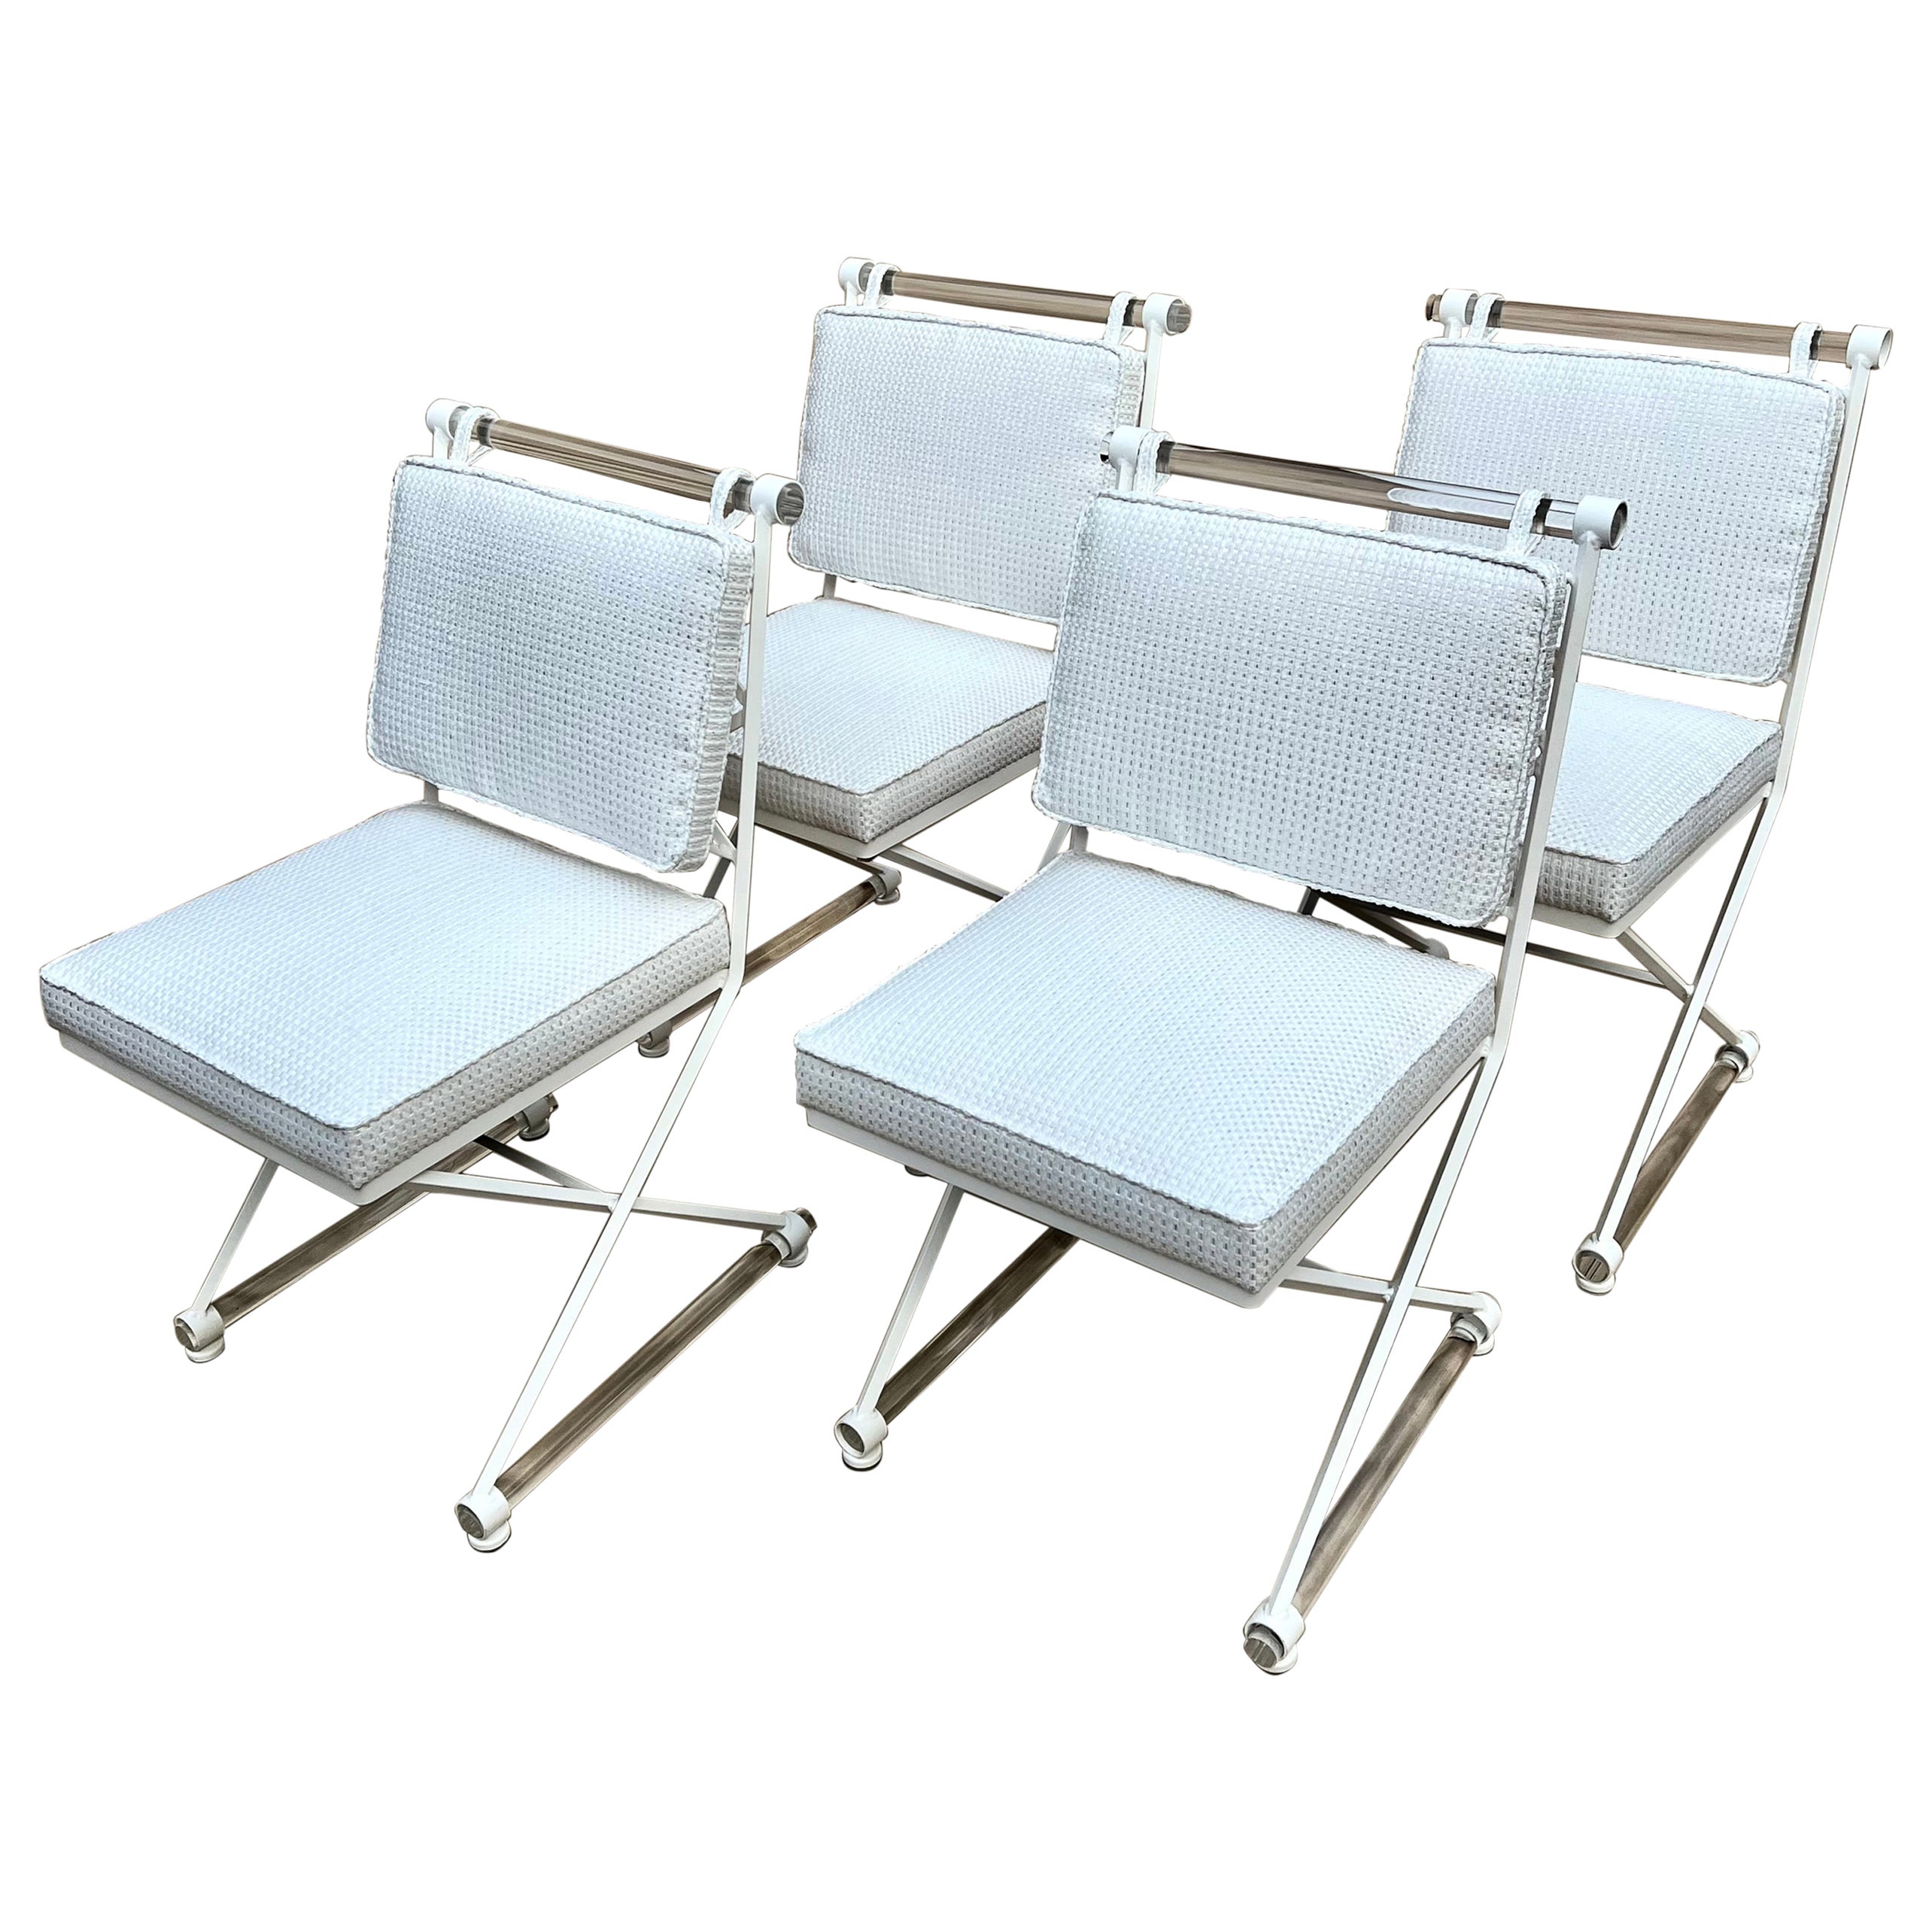 Cleo Baldon X-Form Chairs Restored with Acrylic Dowels and Sunbrella Upholstery For Sale